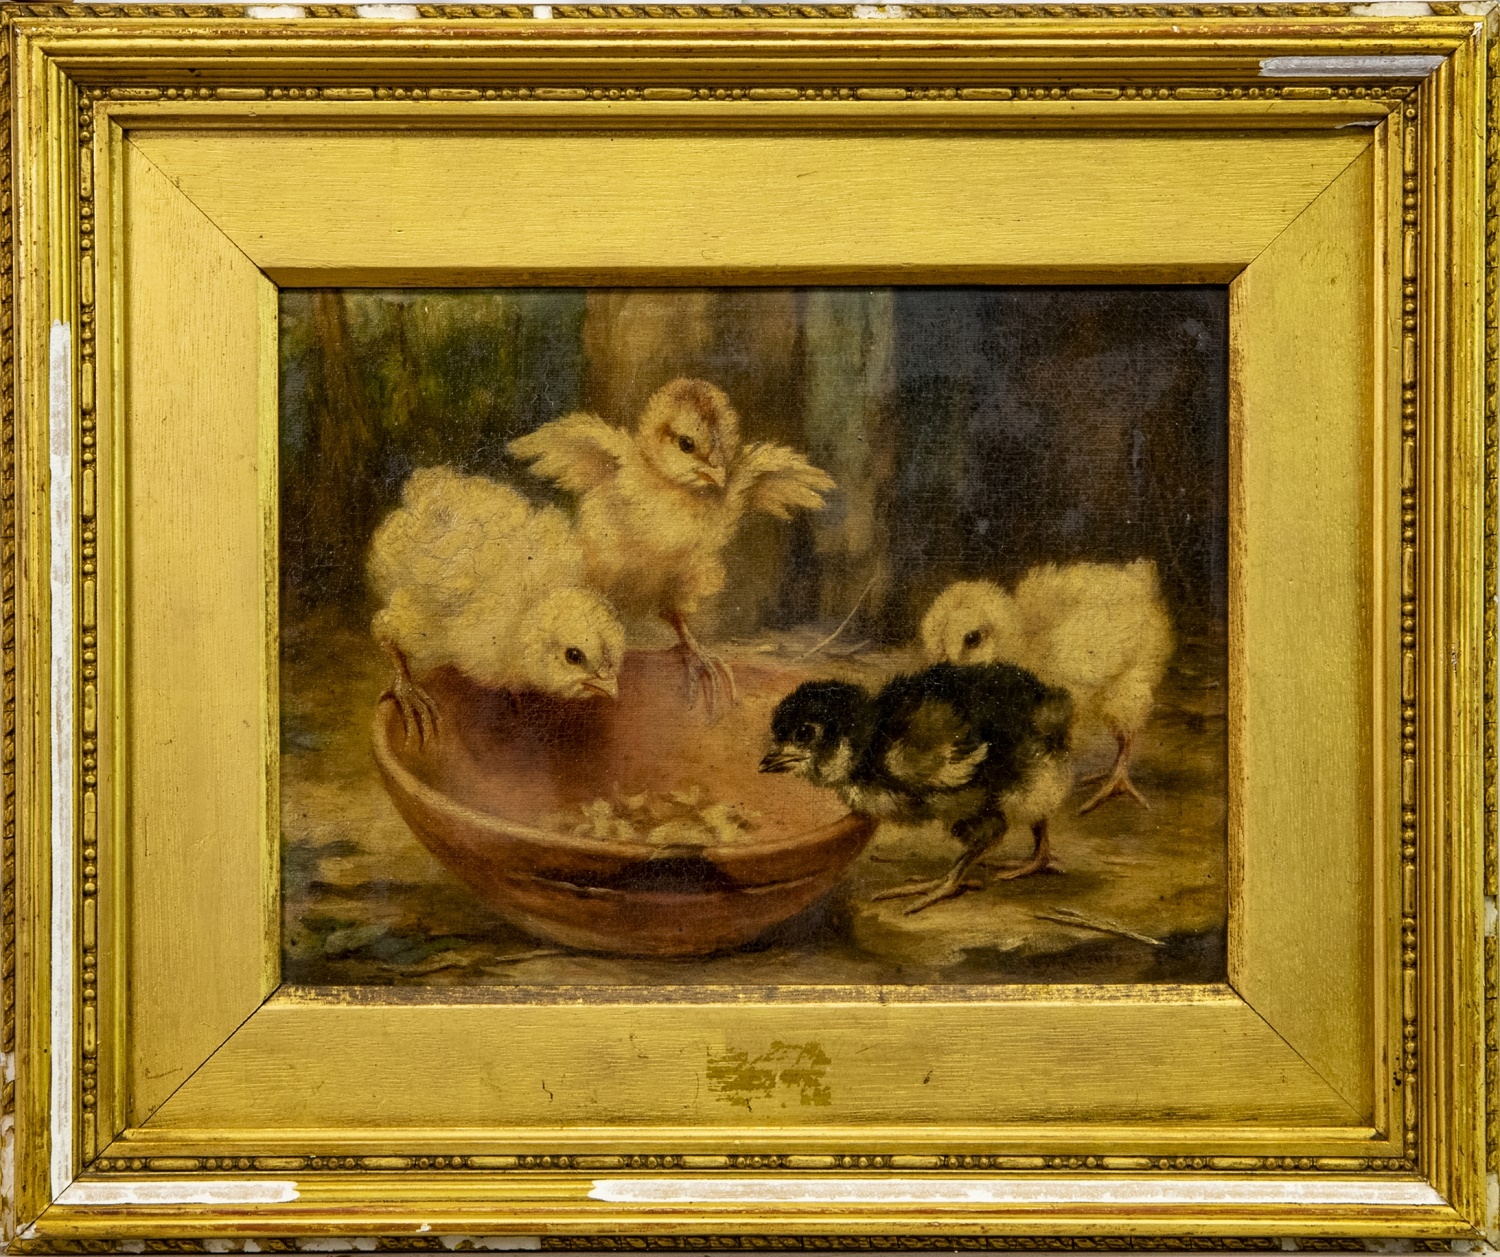 CHICKS, AN OIL BY LUCY ANN LEAVERS